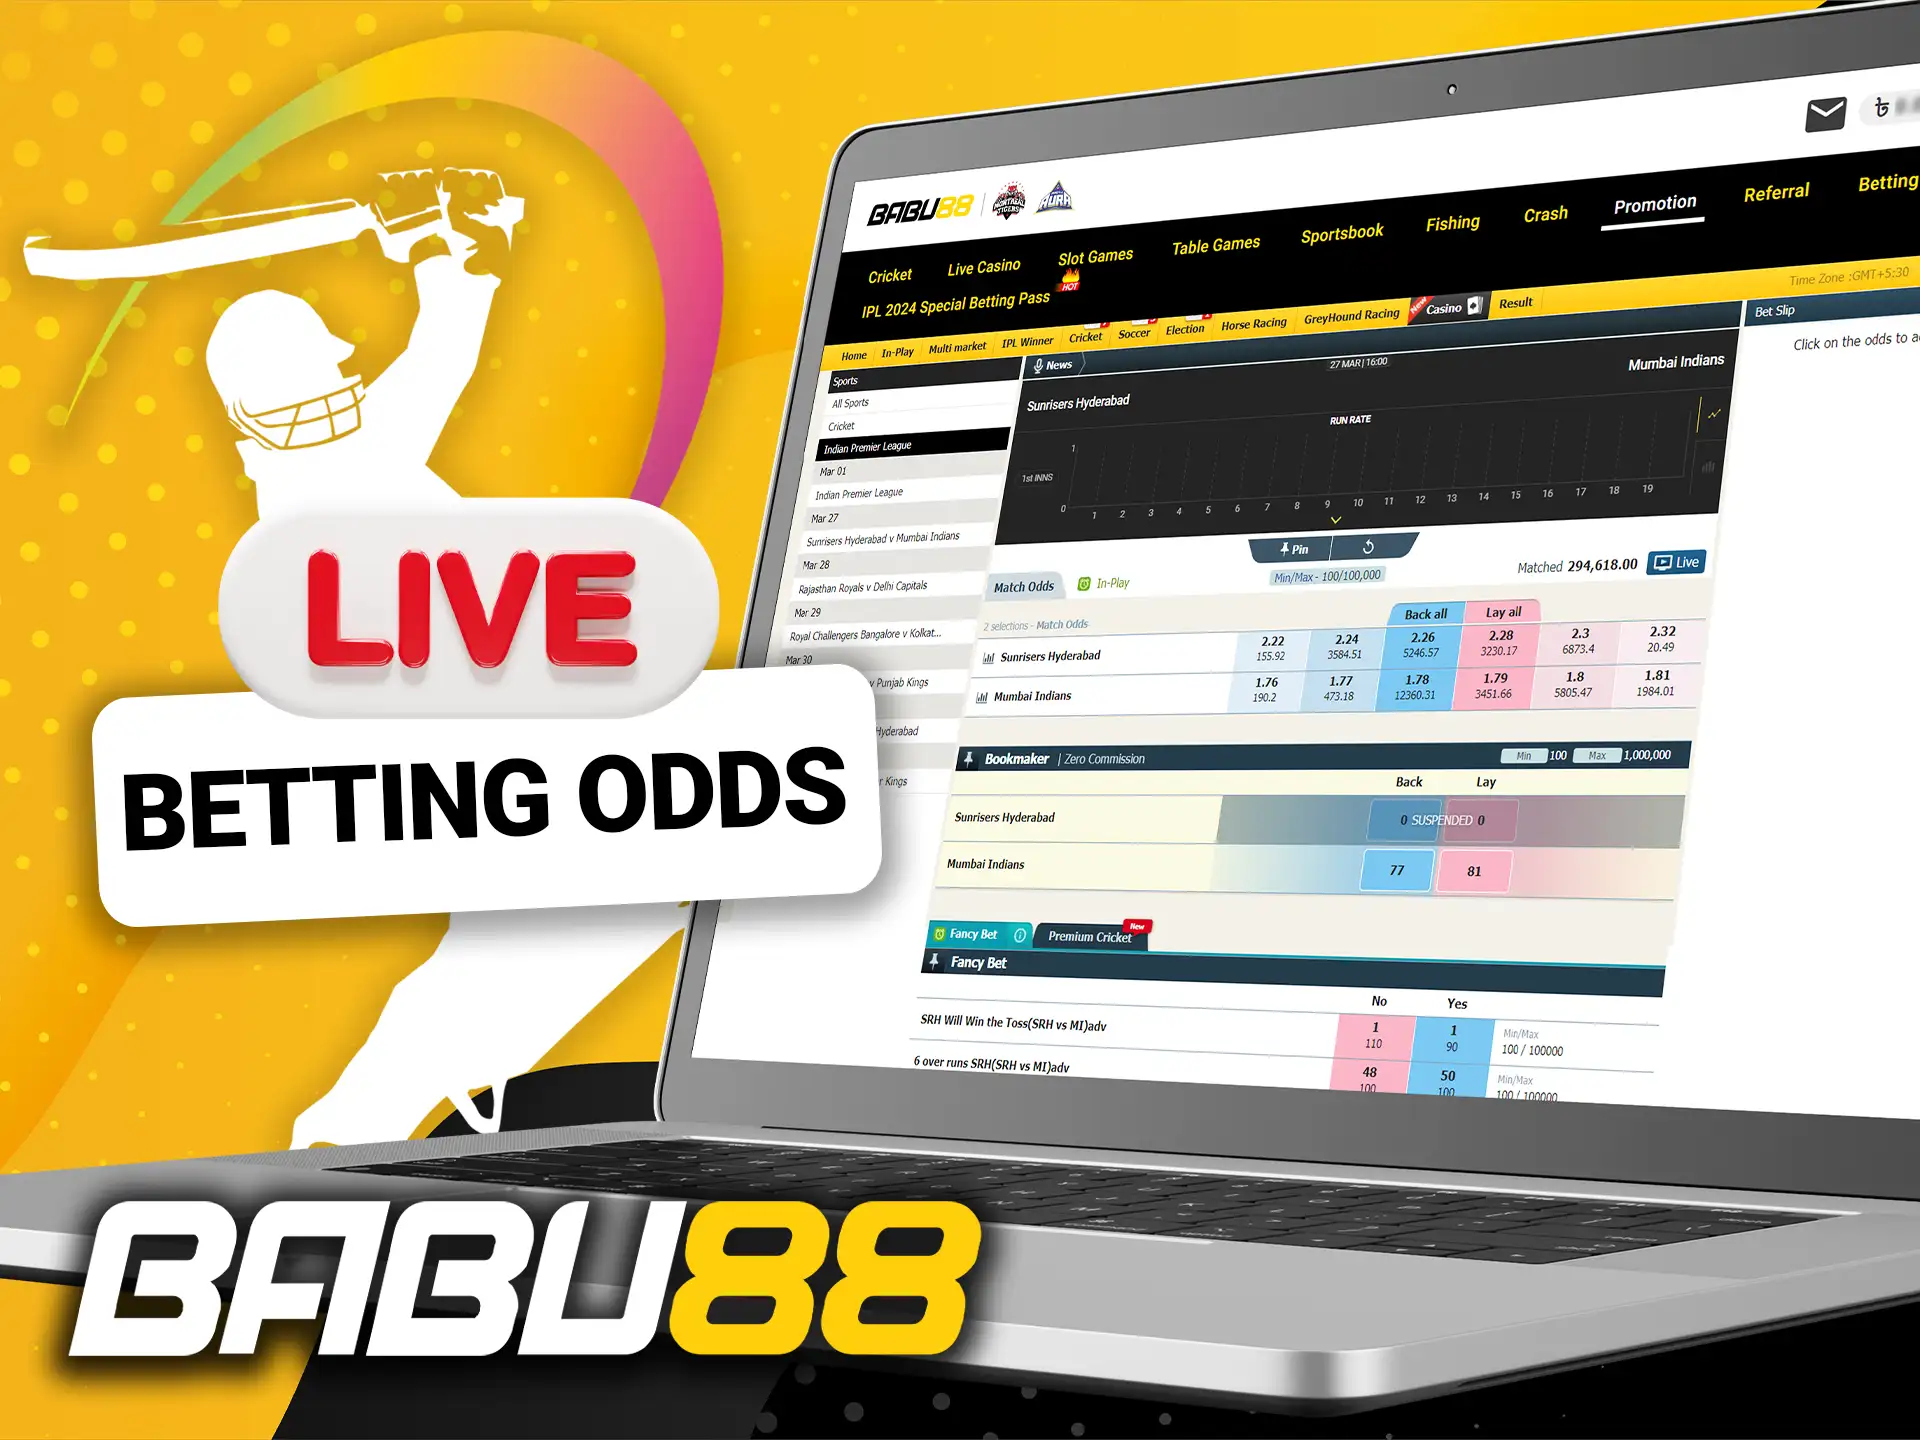 Monitor IPL betting odds in real time at Babu88.